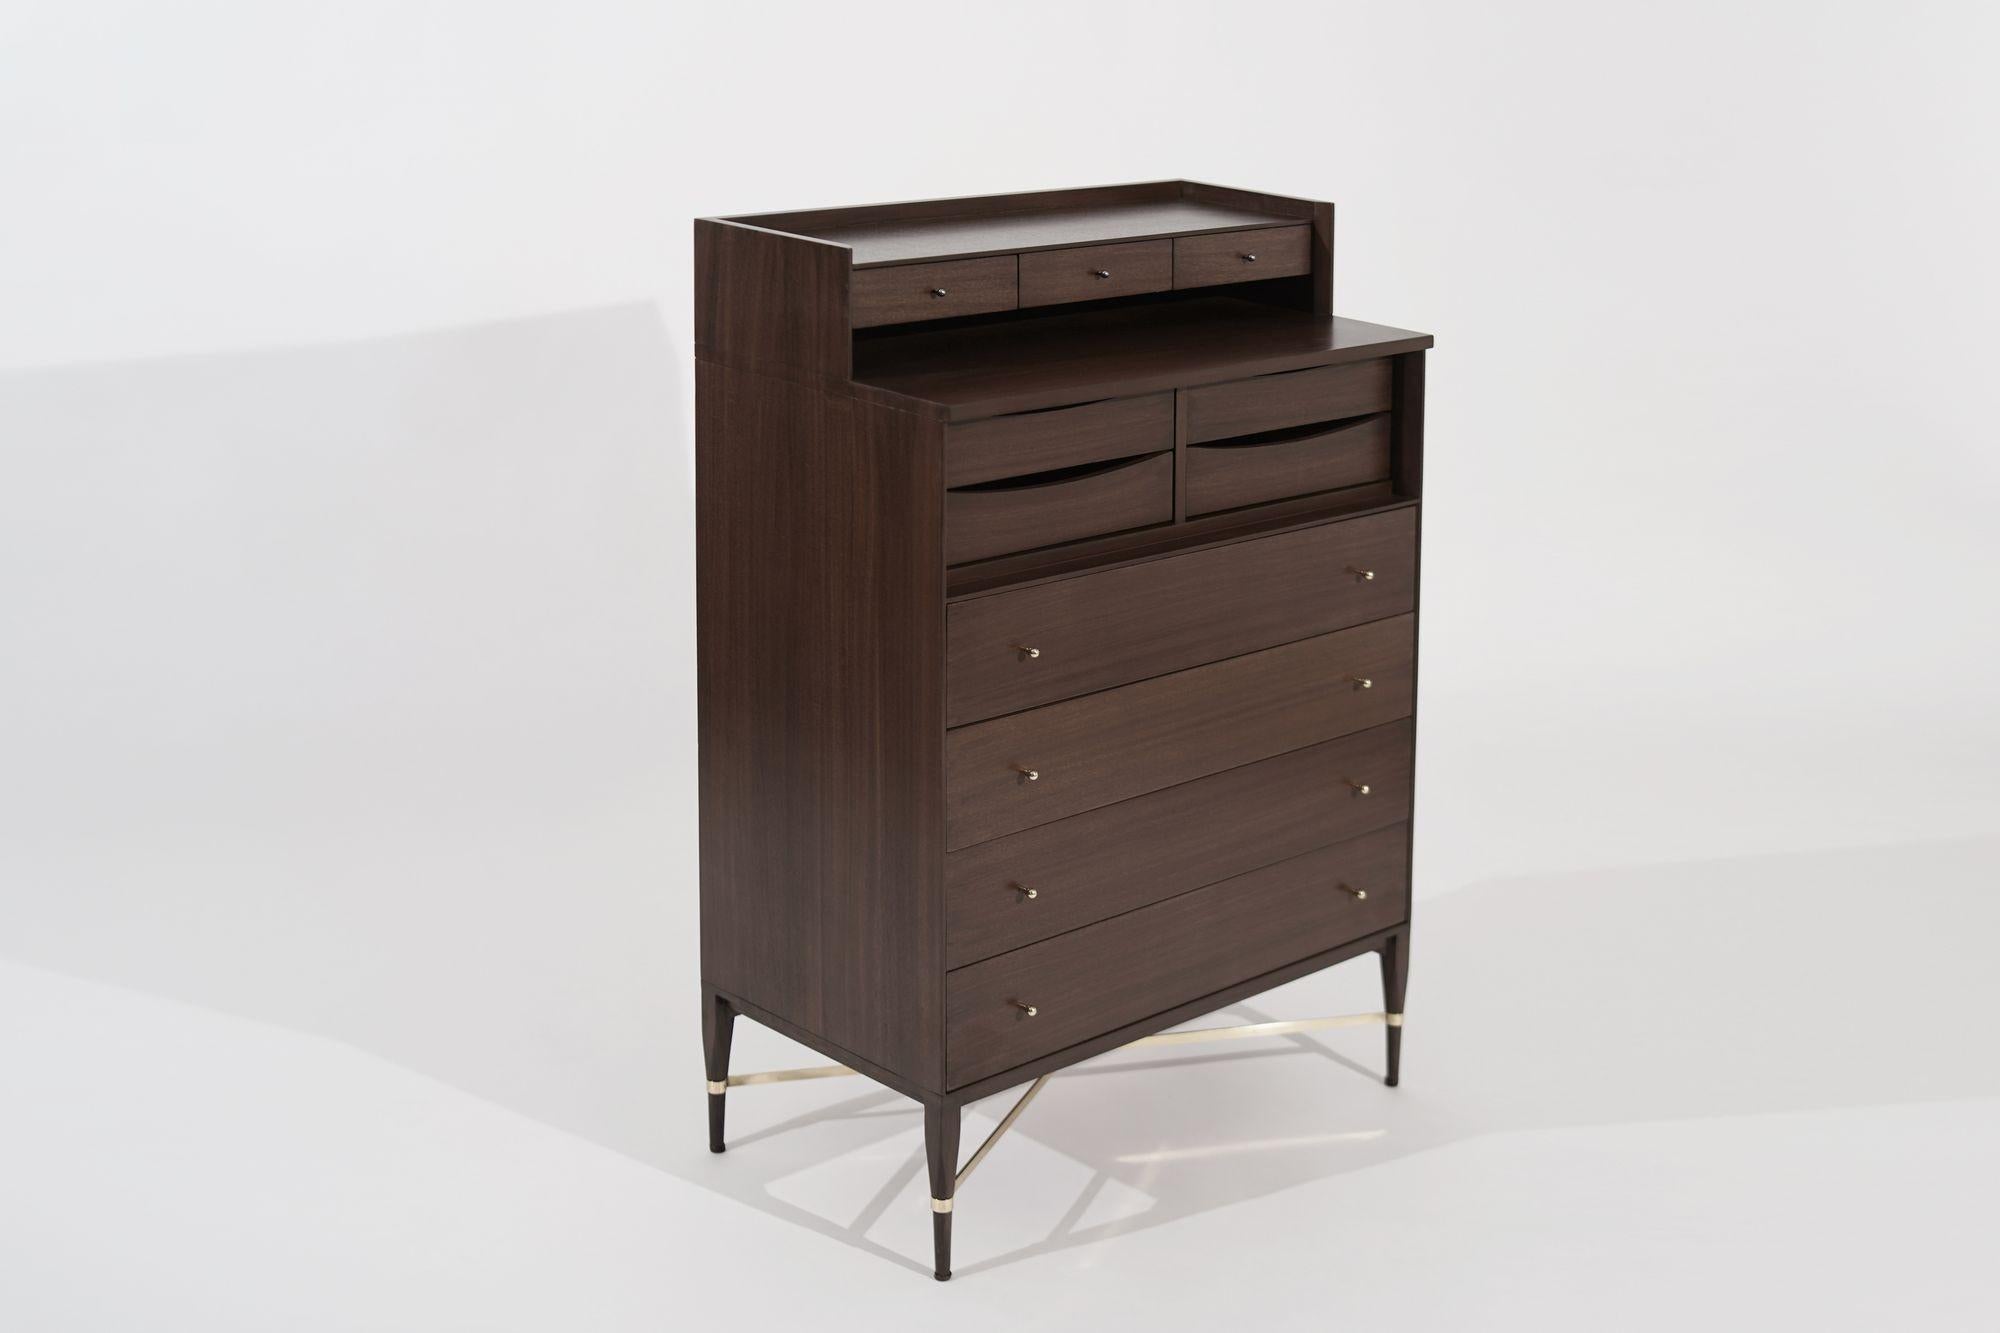 20th Century Paul McCobb Gentleman's Chest of Drawers in Mahogany, circa 1950s For Sale